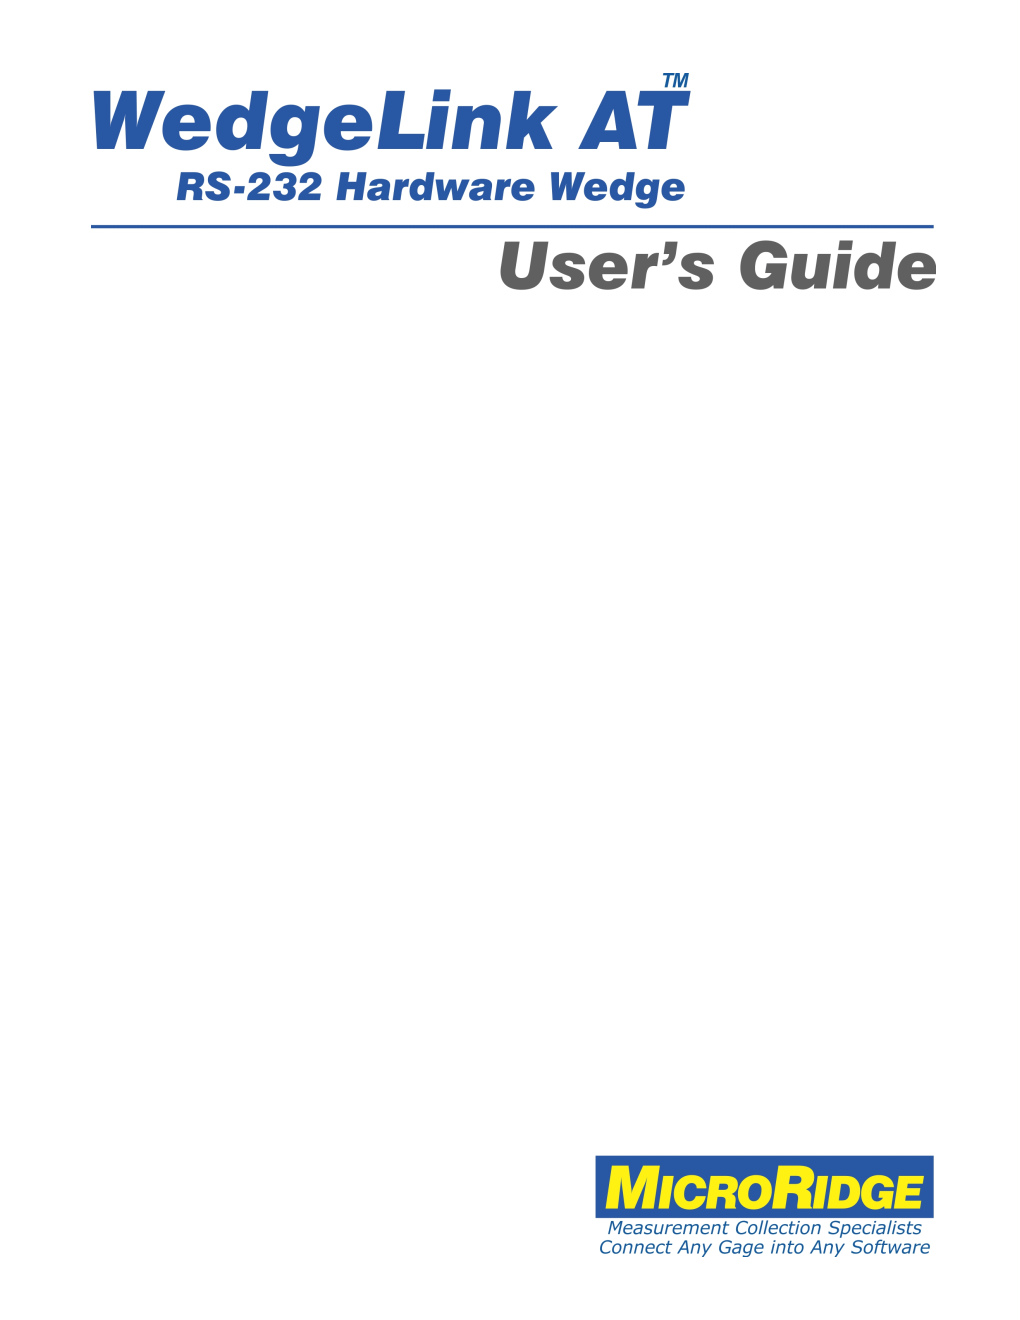 Wedgelink at User's Guide